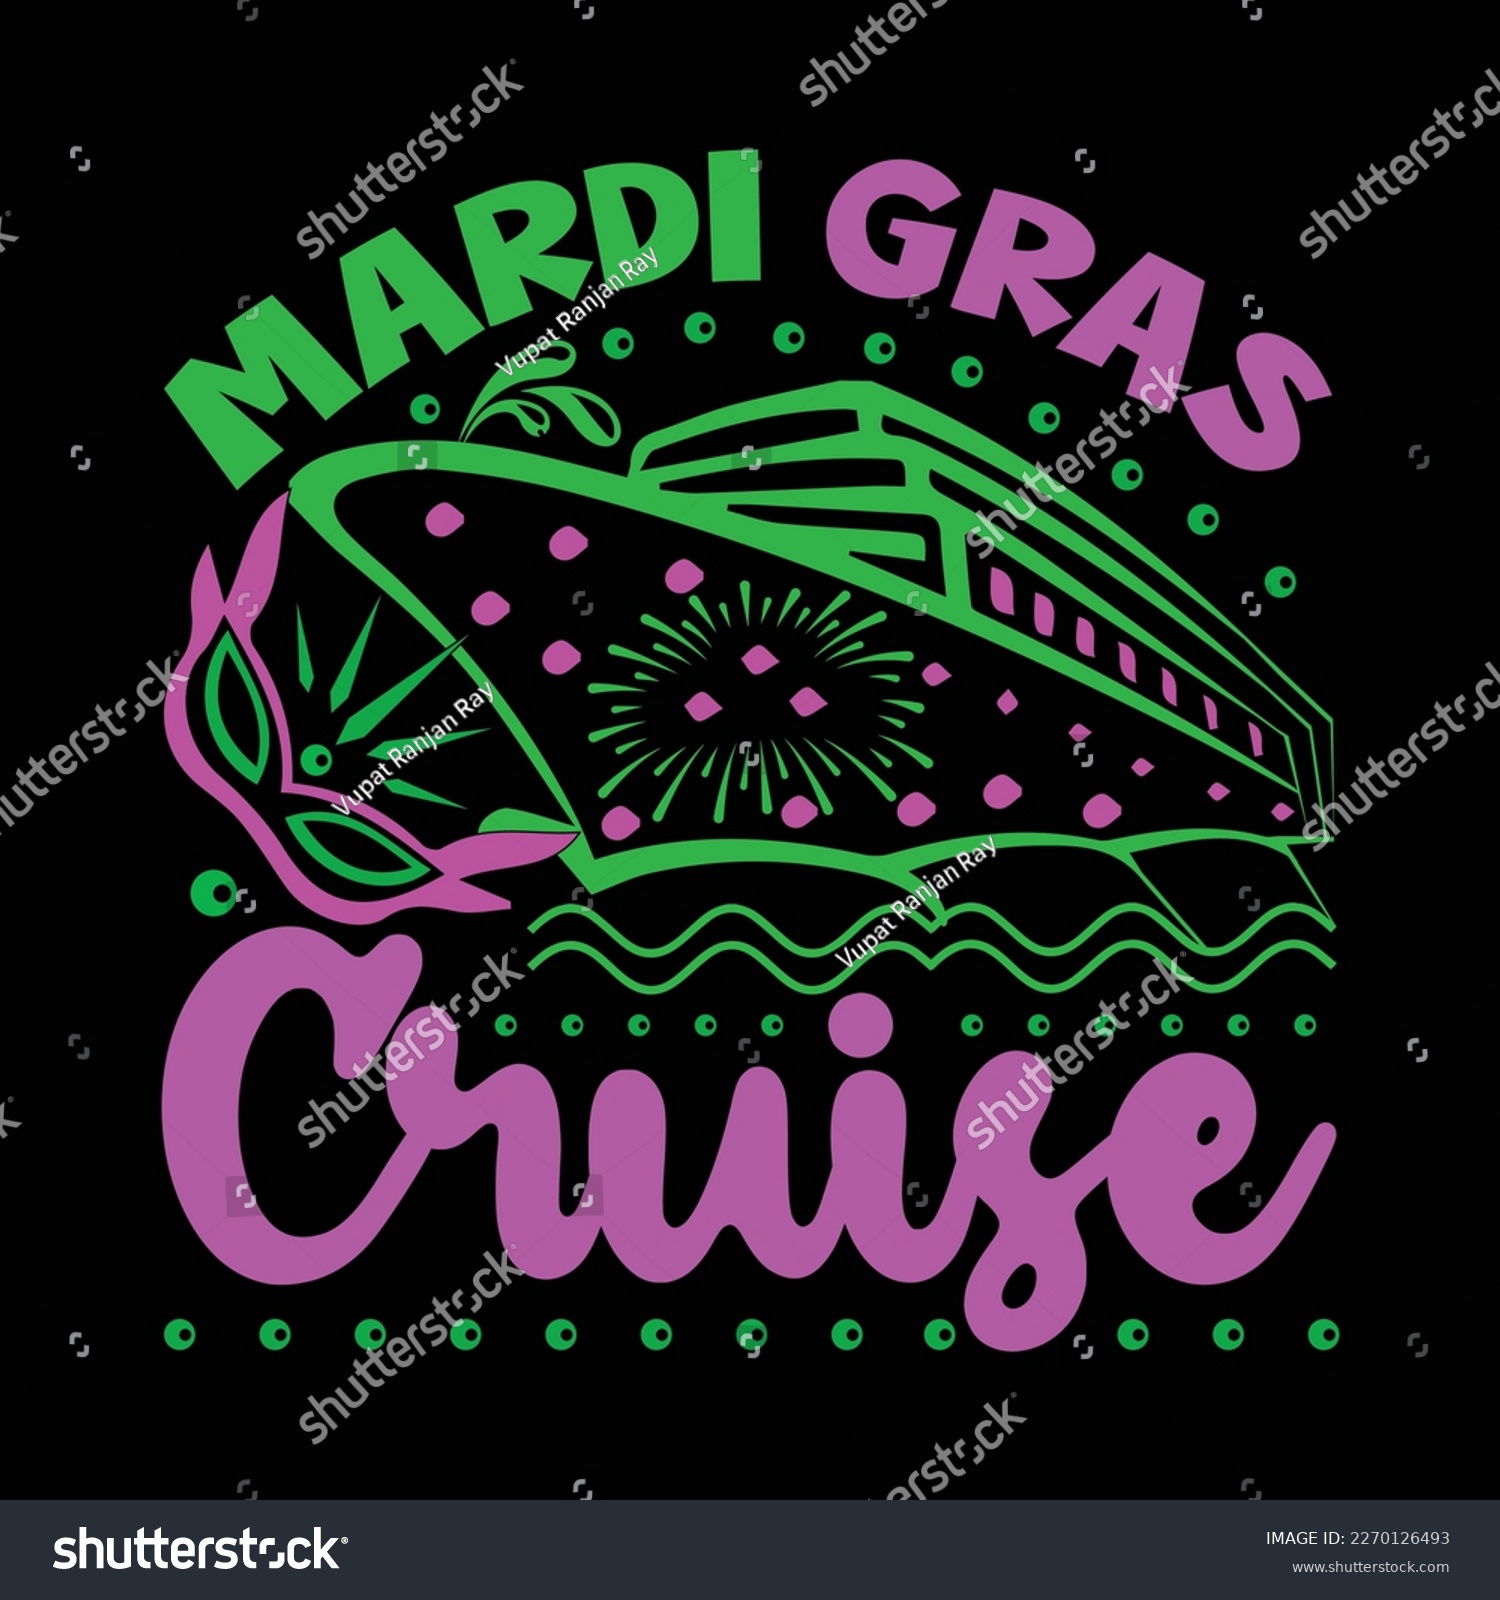 SVG of Mardi Gras Cruise Svg  Designs .Try creating fun crafts and gifts for friends and family using your favorite digital design for  love  . monogram making, t-shirt design, sign making, card making, more svg